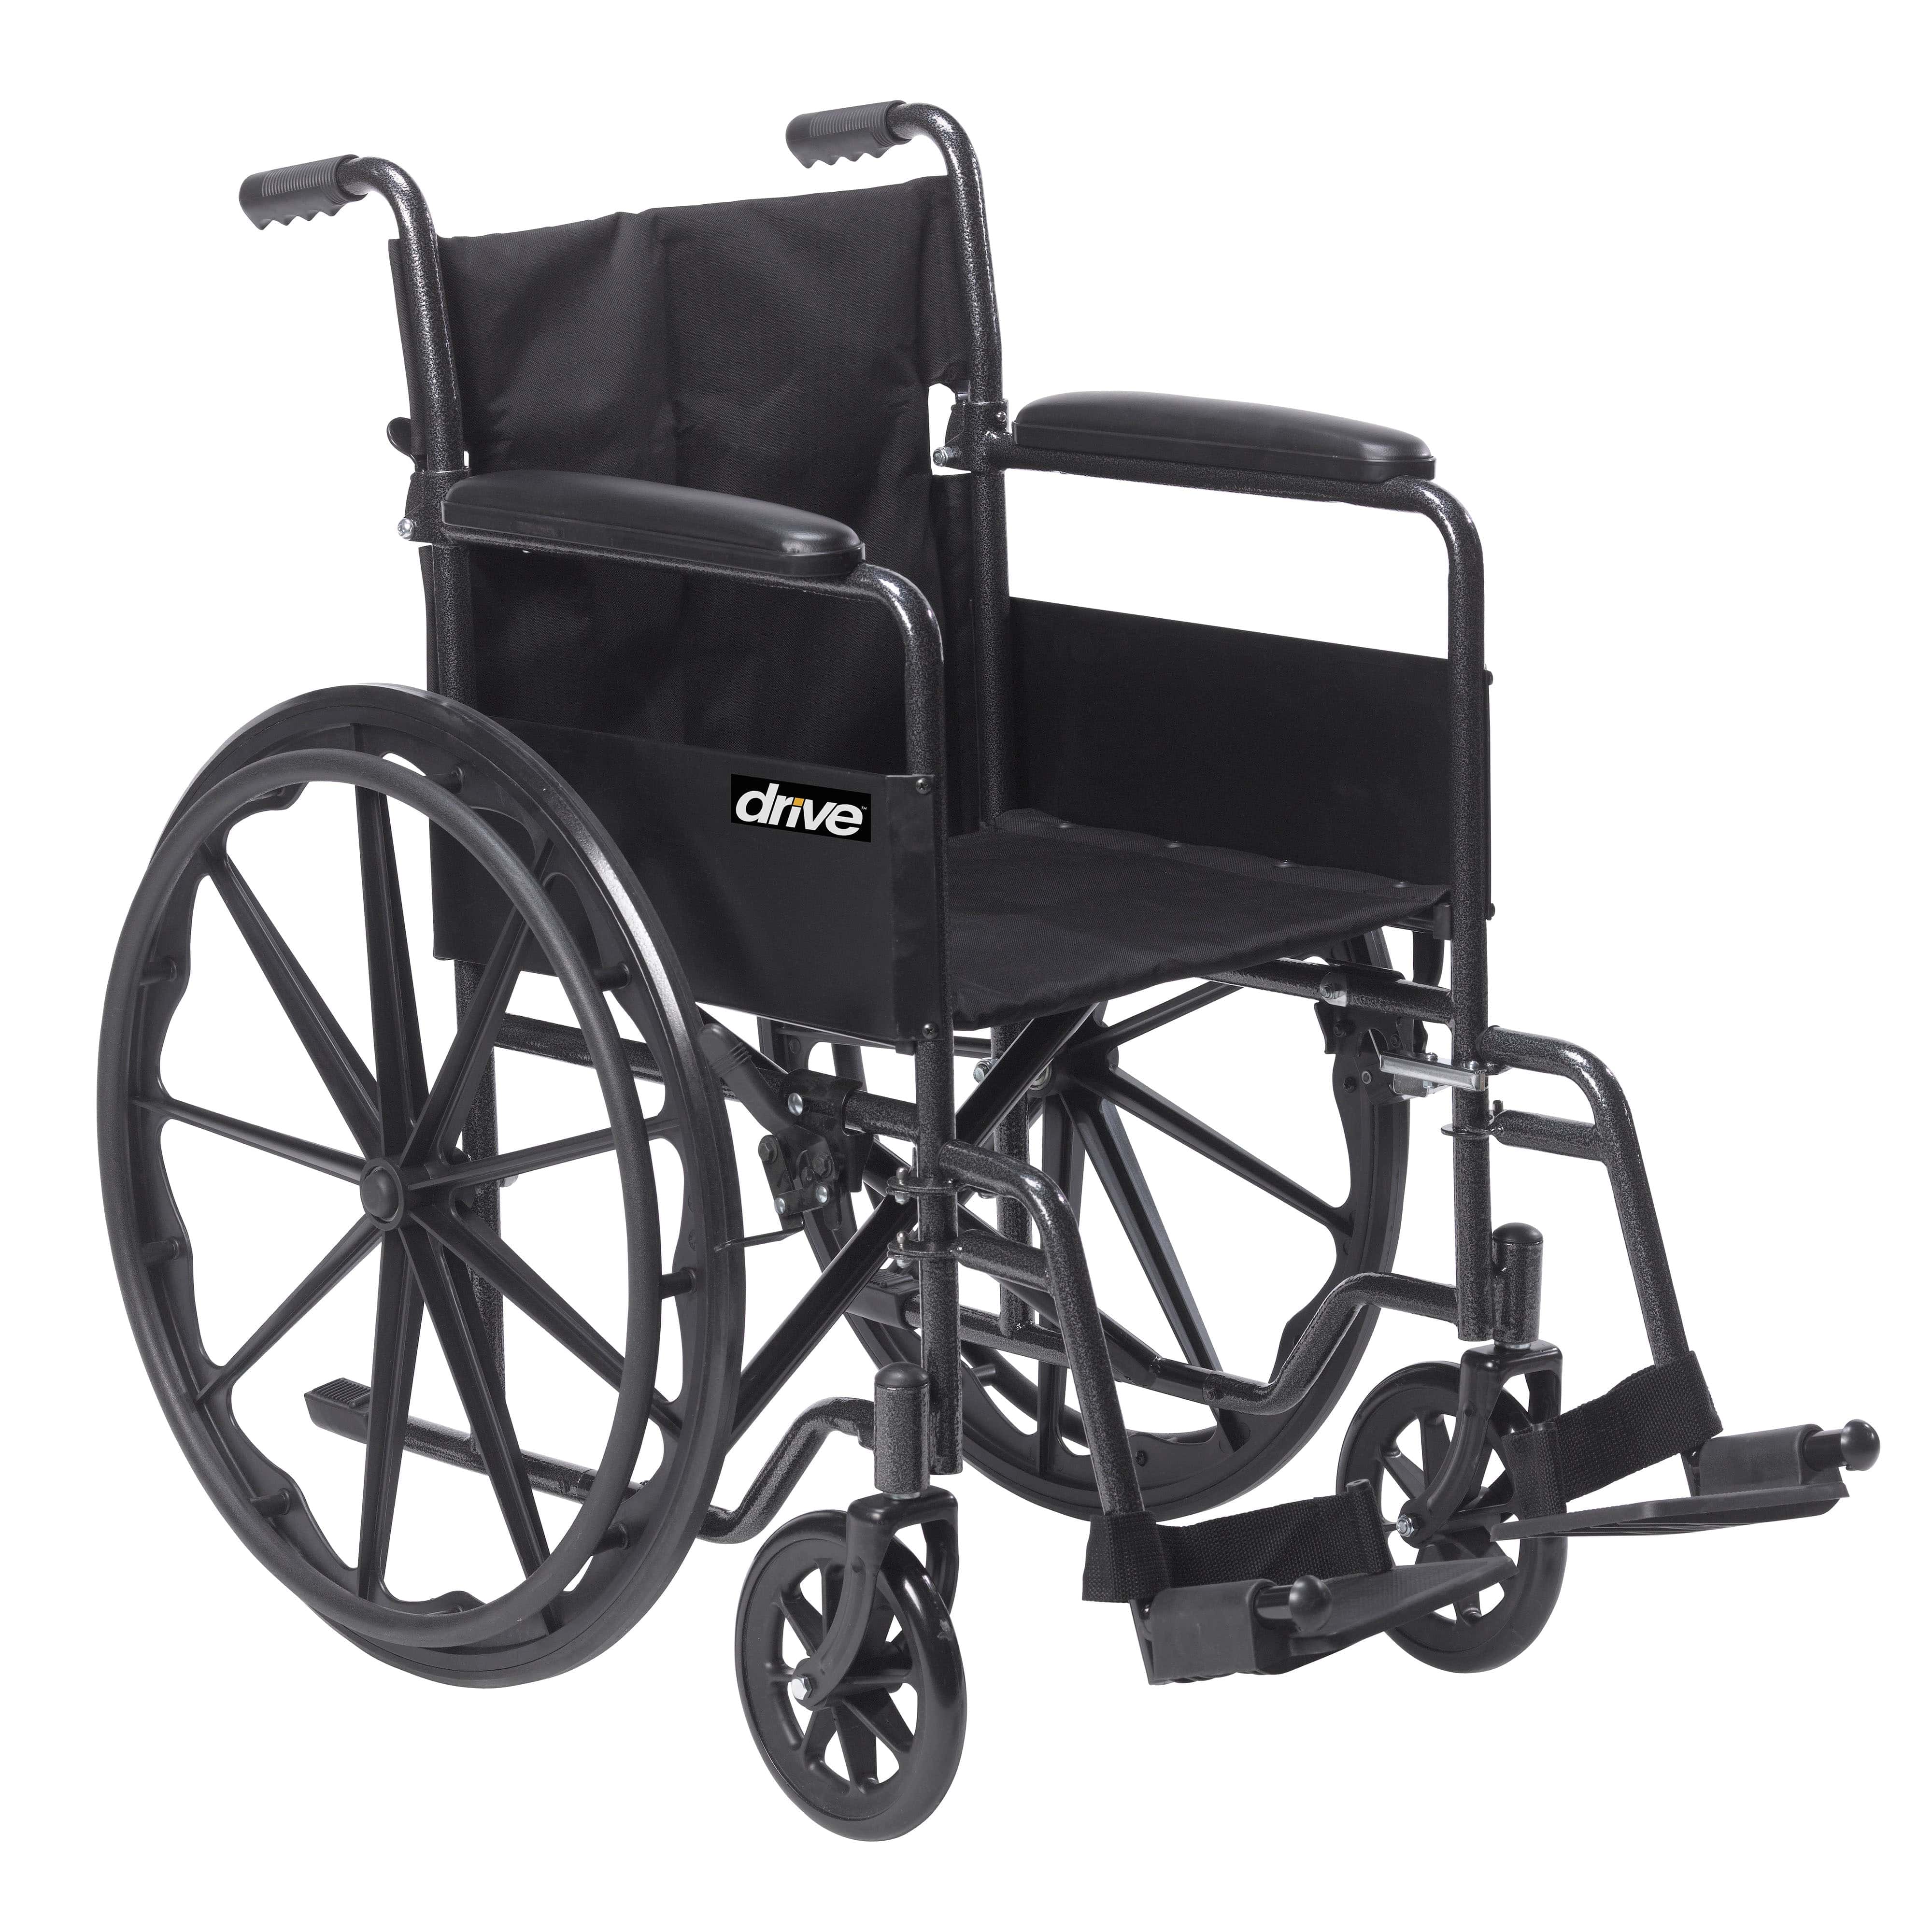 Drive Medical Drive Medical Silver Sport 1 Wheelchair with Full Arms and Swing away Removable Footrest ssp118fa-sf